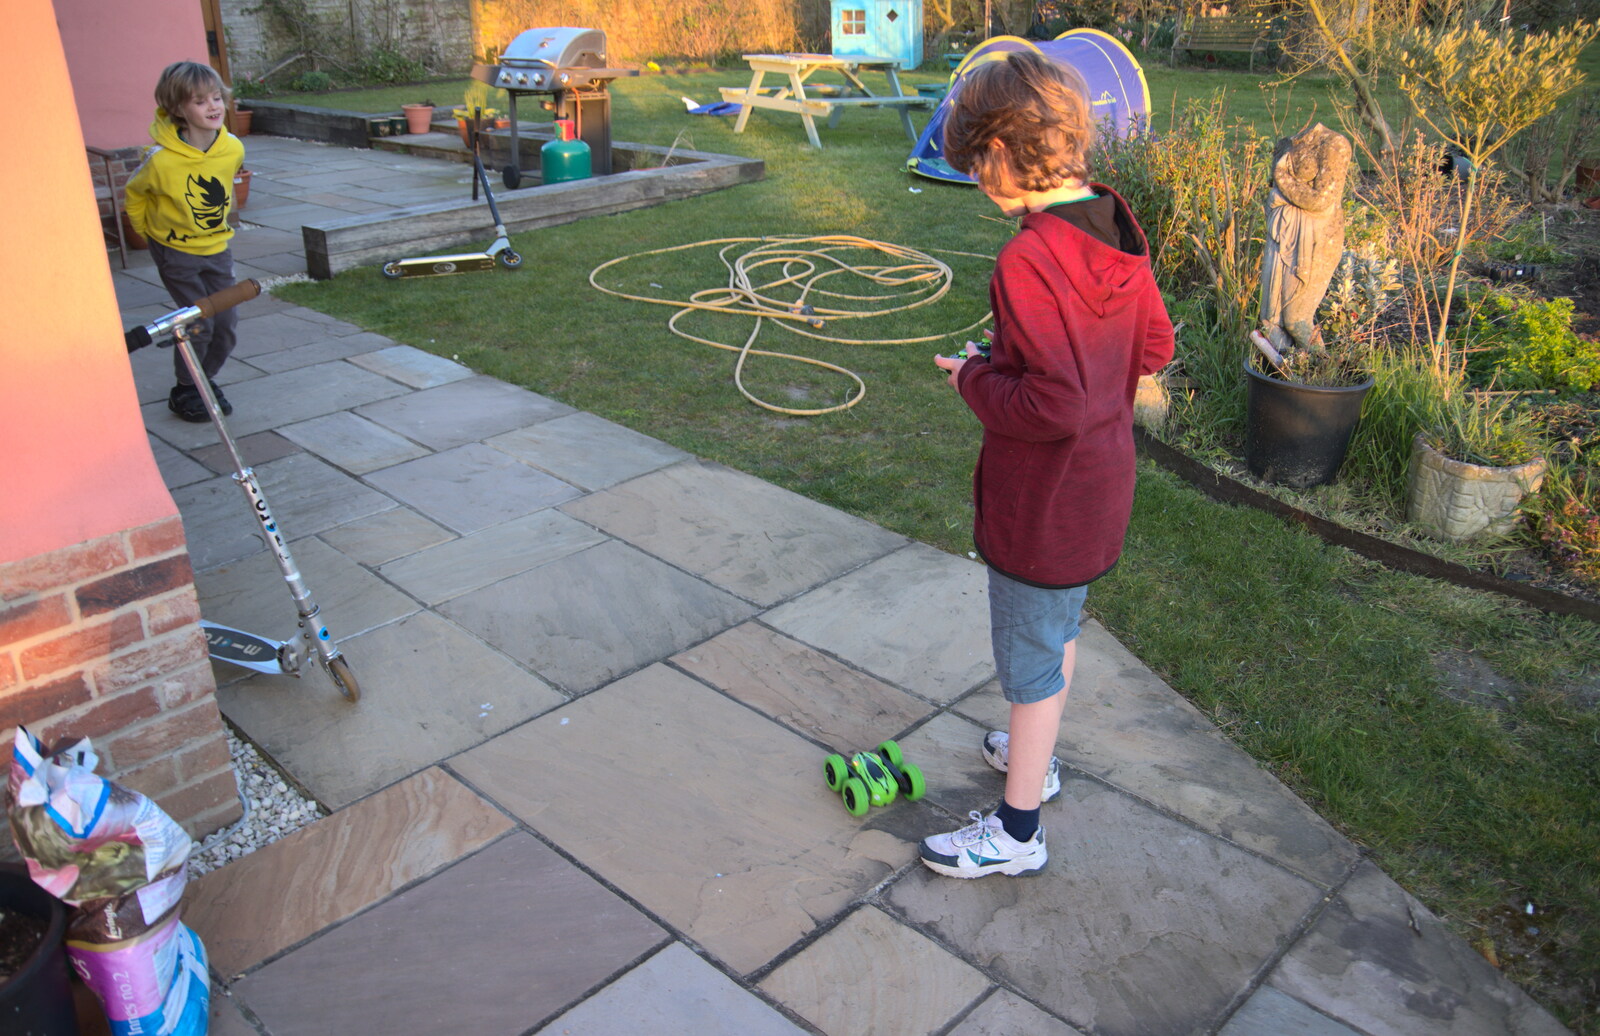 Fred drives a remote-control car on the patio from An April Lockdown Miscellany, Eye, Suffolk - 10th April 2020